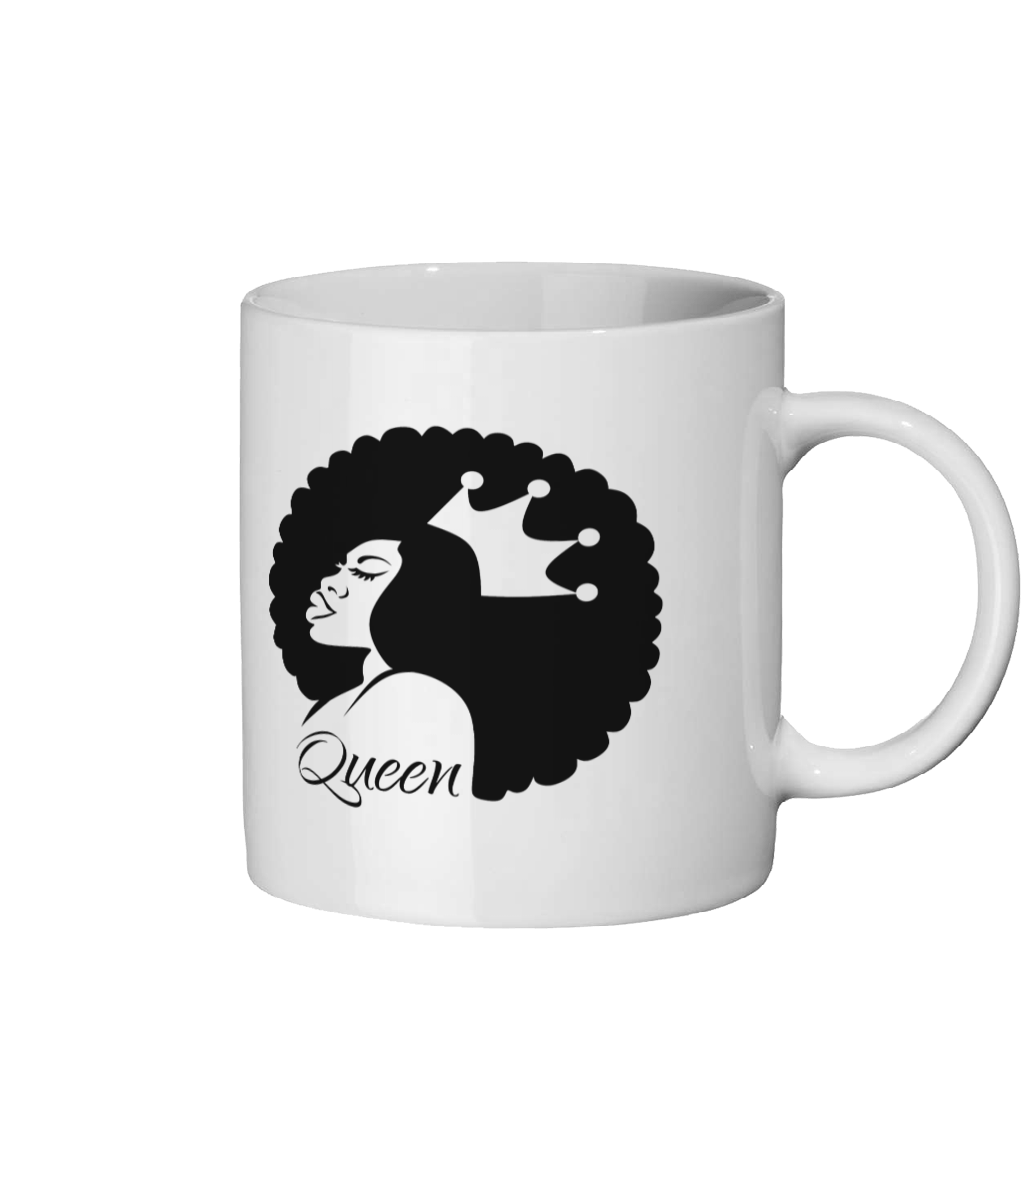 Afro Queen Ceramic Mug - FAST UK DELIVERY